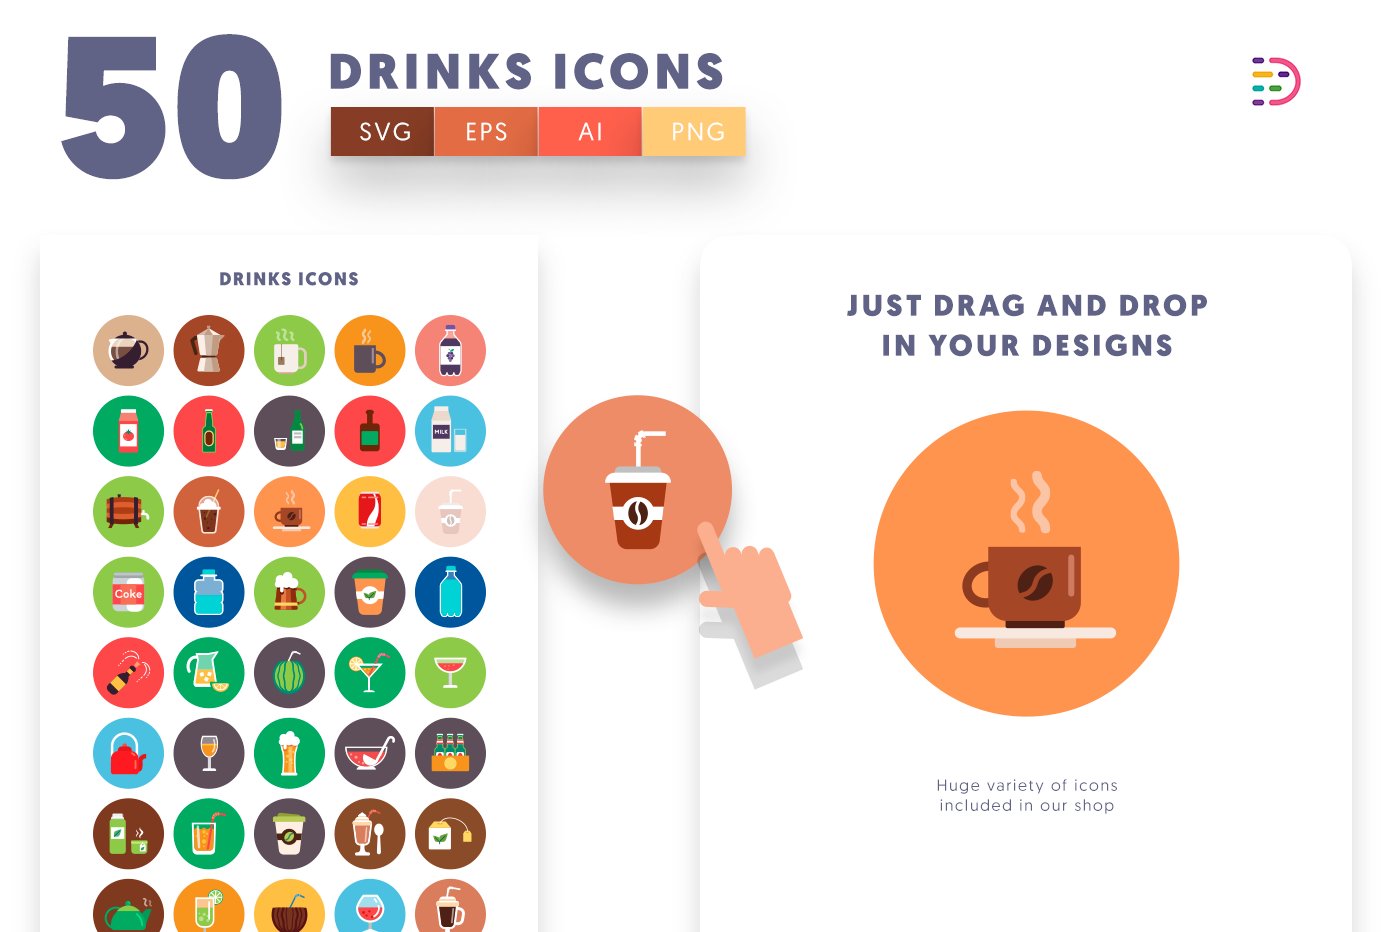 50 Drinks Icons preview image.